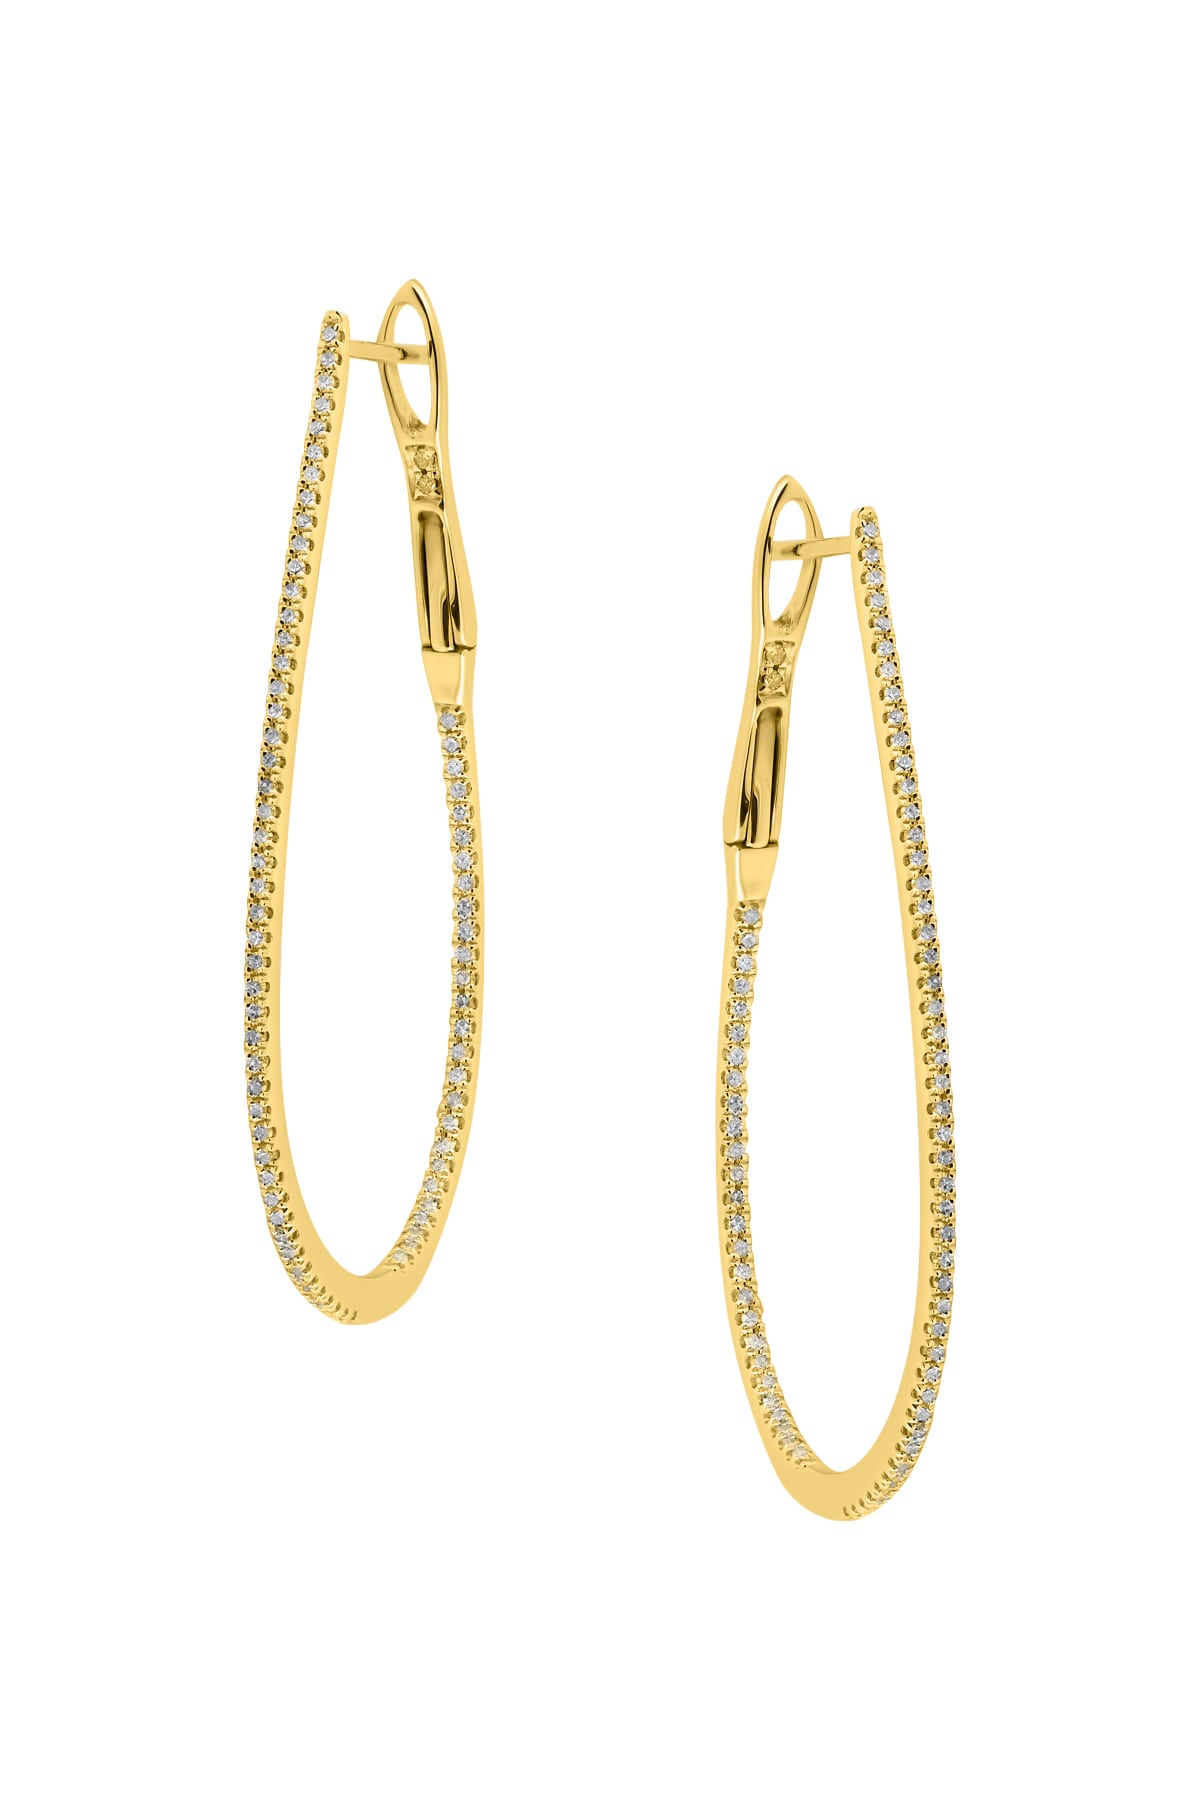 Large Oval In And Out Hoop Earrings In Yellow Gold from LeGassick Jewellery.